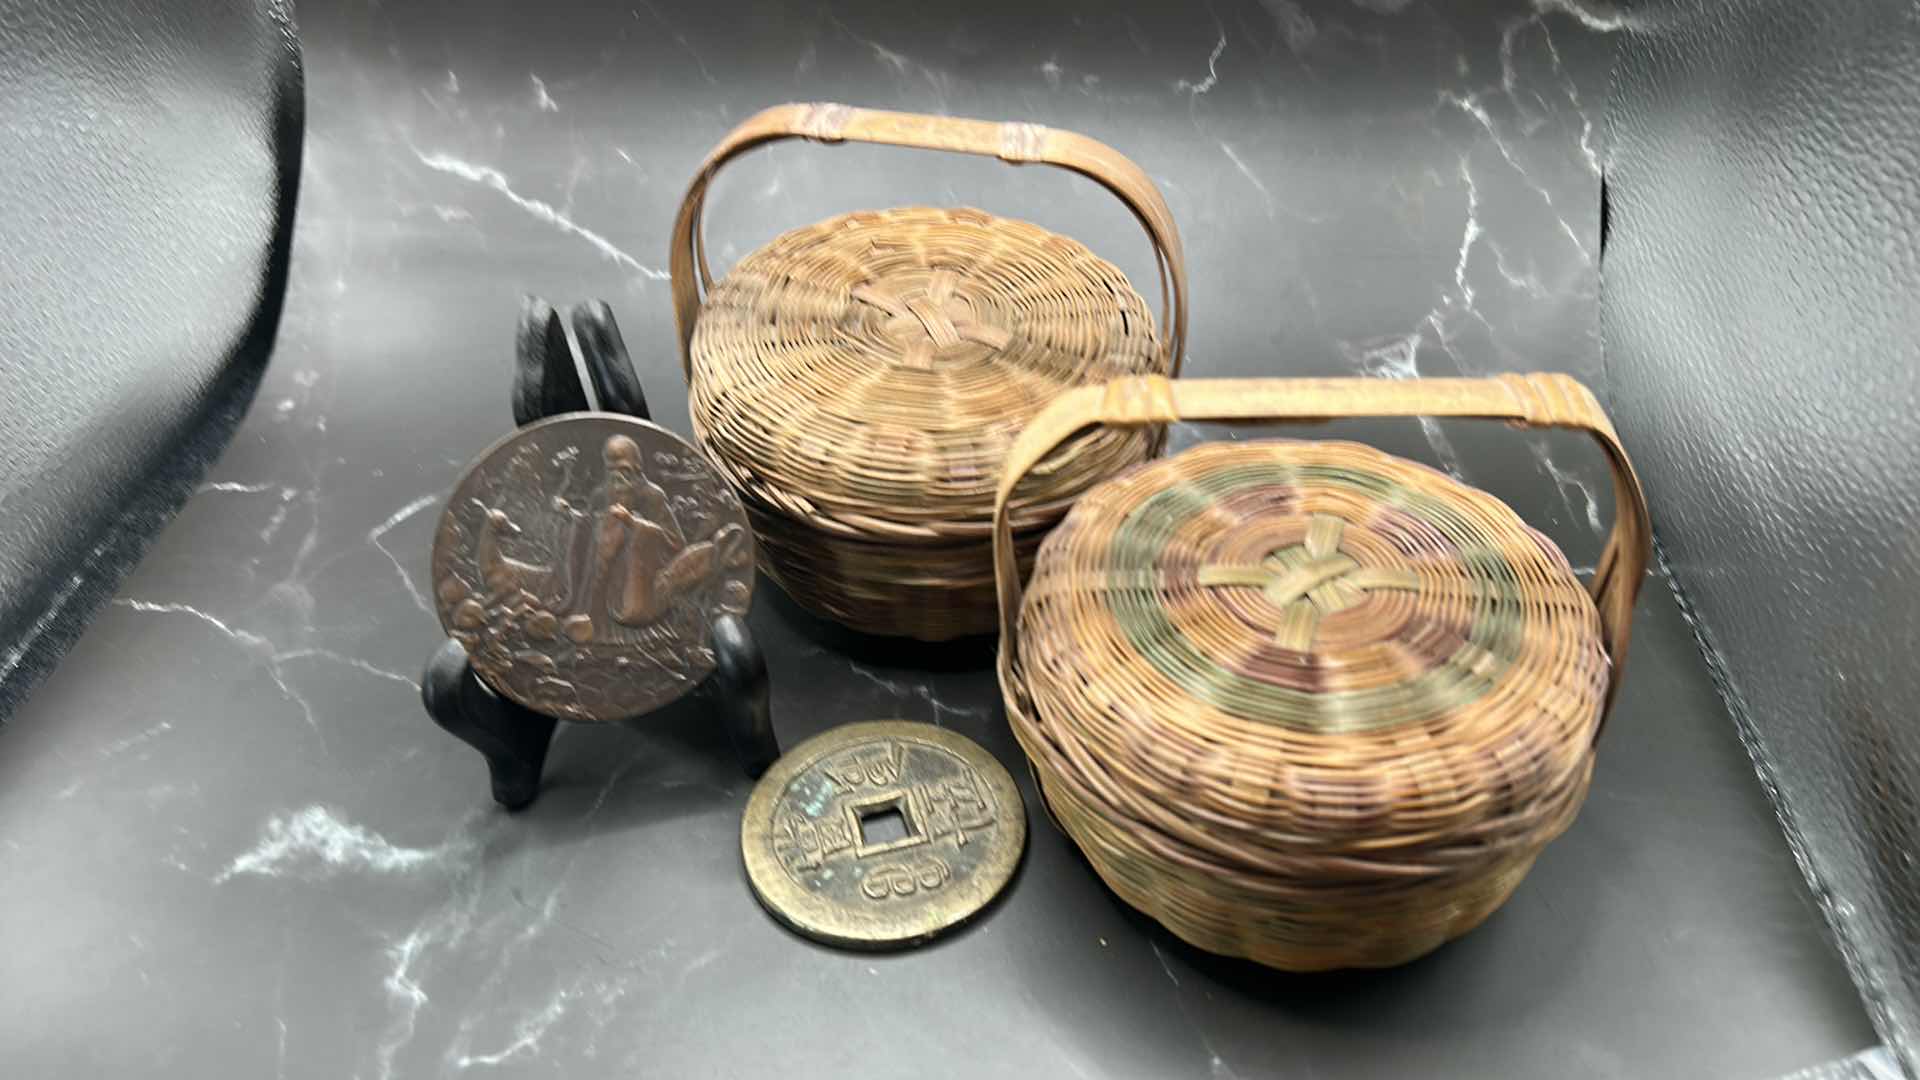 Photo 8 of 4 - PIECE CHINESE COLLECTIBLES - TWO WOVEN BASKETS AND TWO METAL COINS (LARGEST BASKET MEASURES 5” x 5”